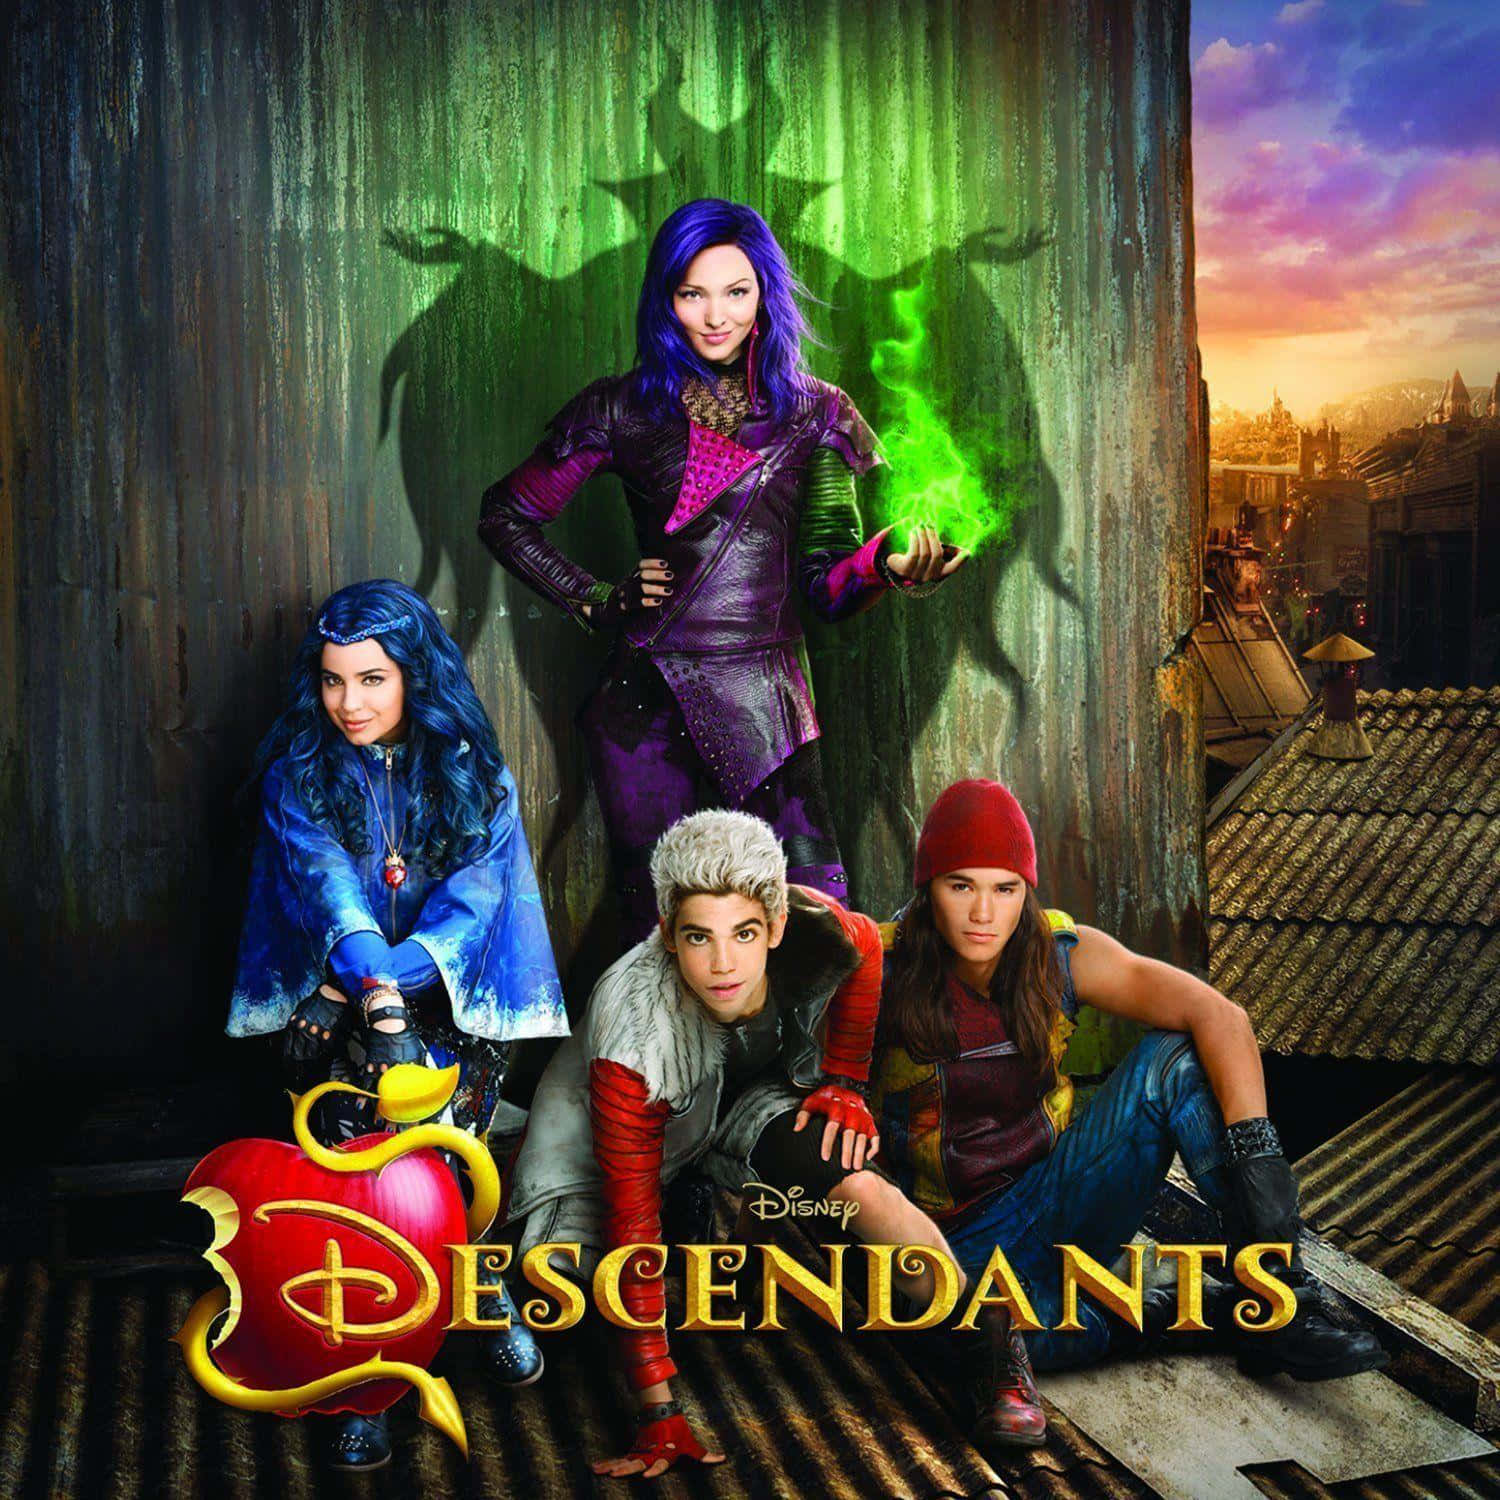 The Main Cast of Descendants in a Magical World